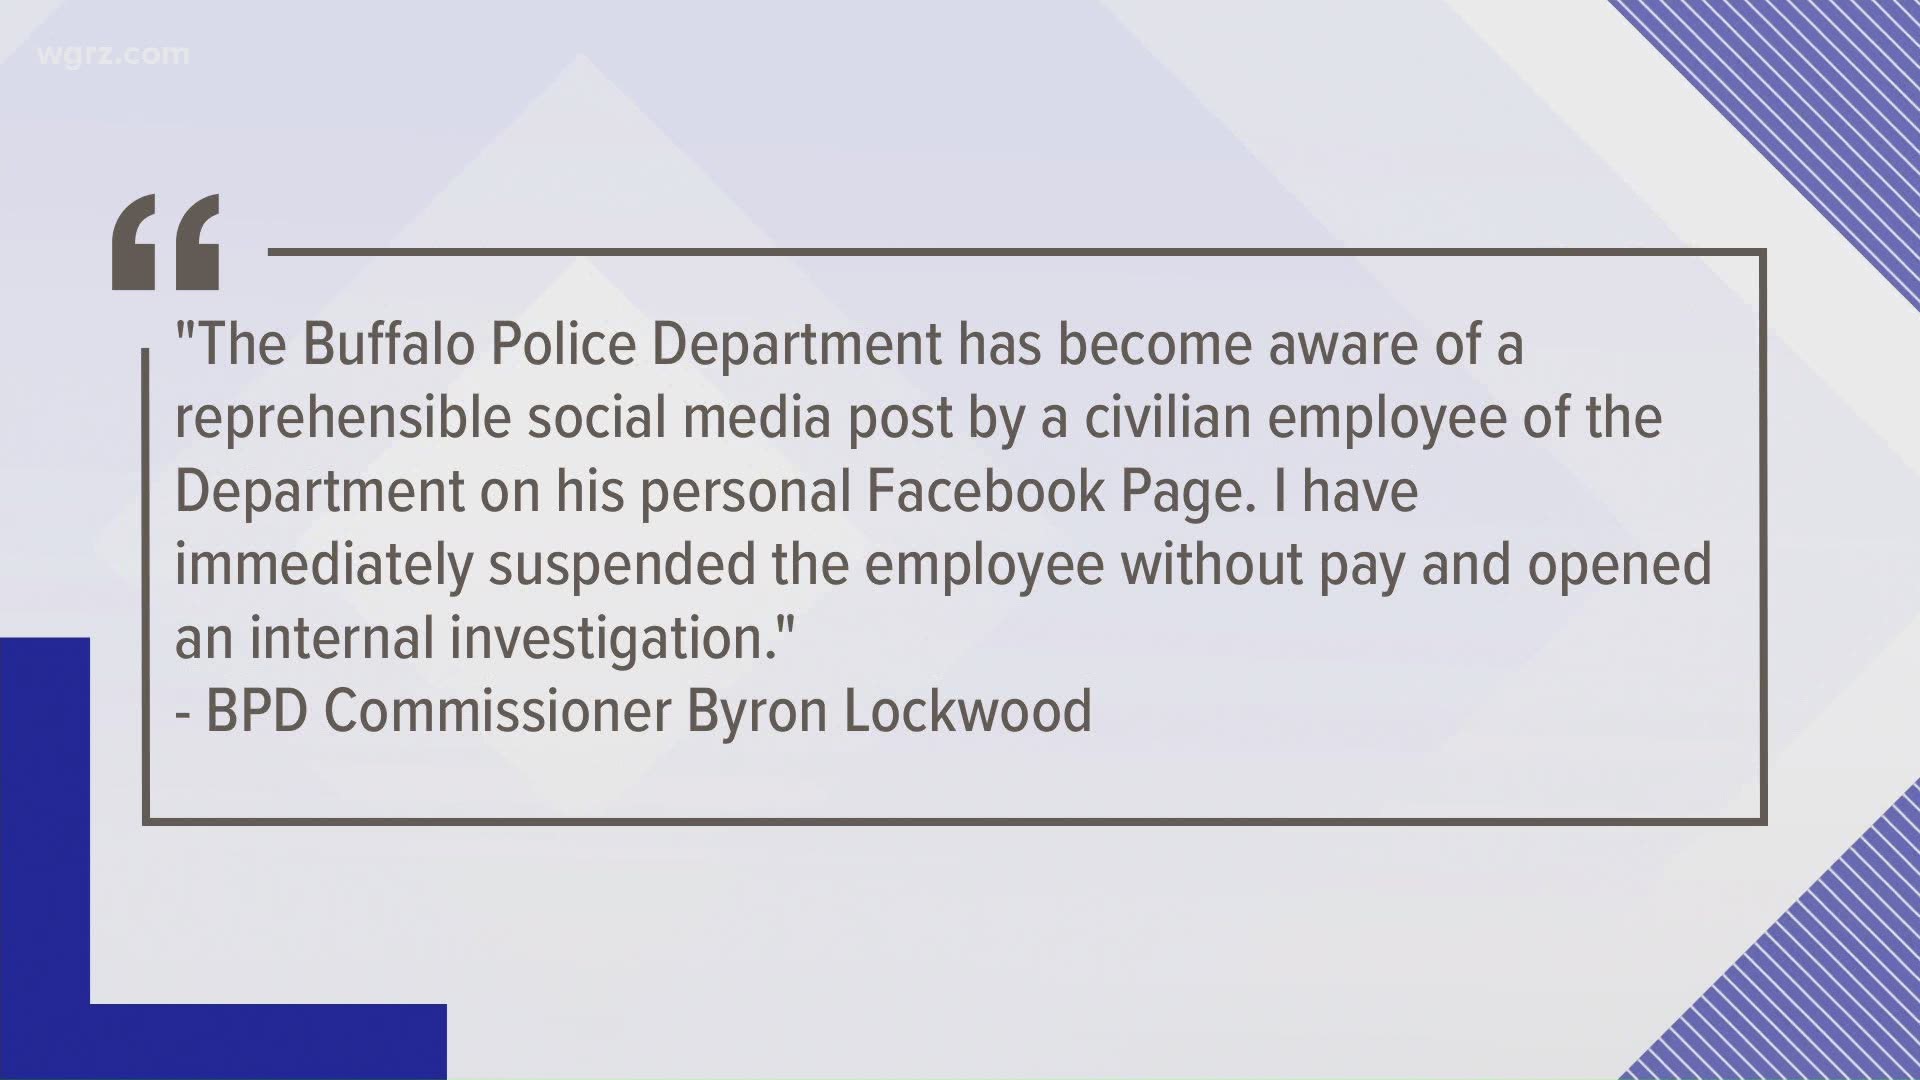 Byron Lockwood issued this statement to us earlier tonight, detailing the suspension of a civilian employee over an offensive Facebook post.